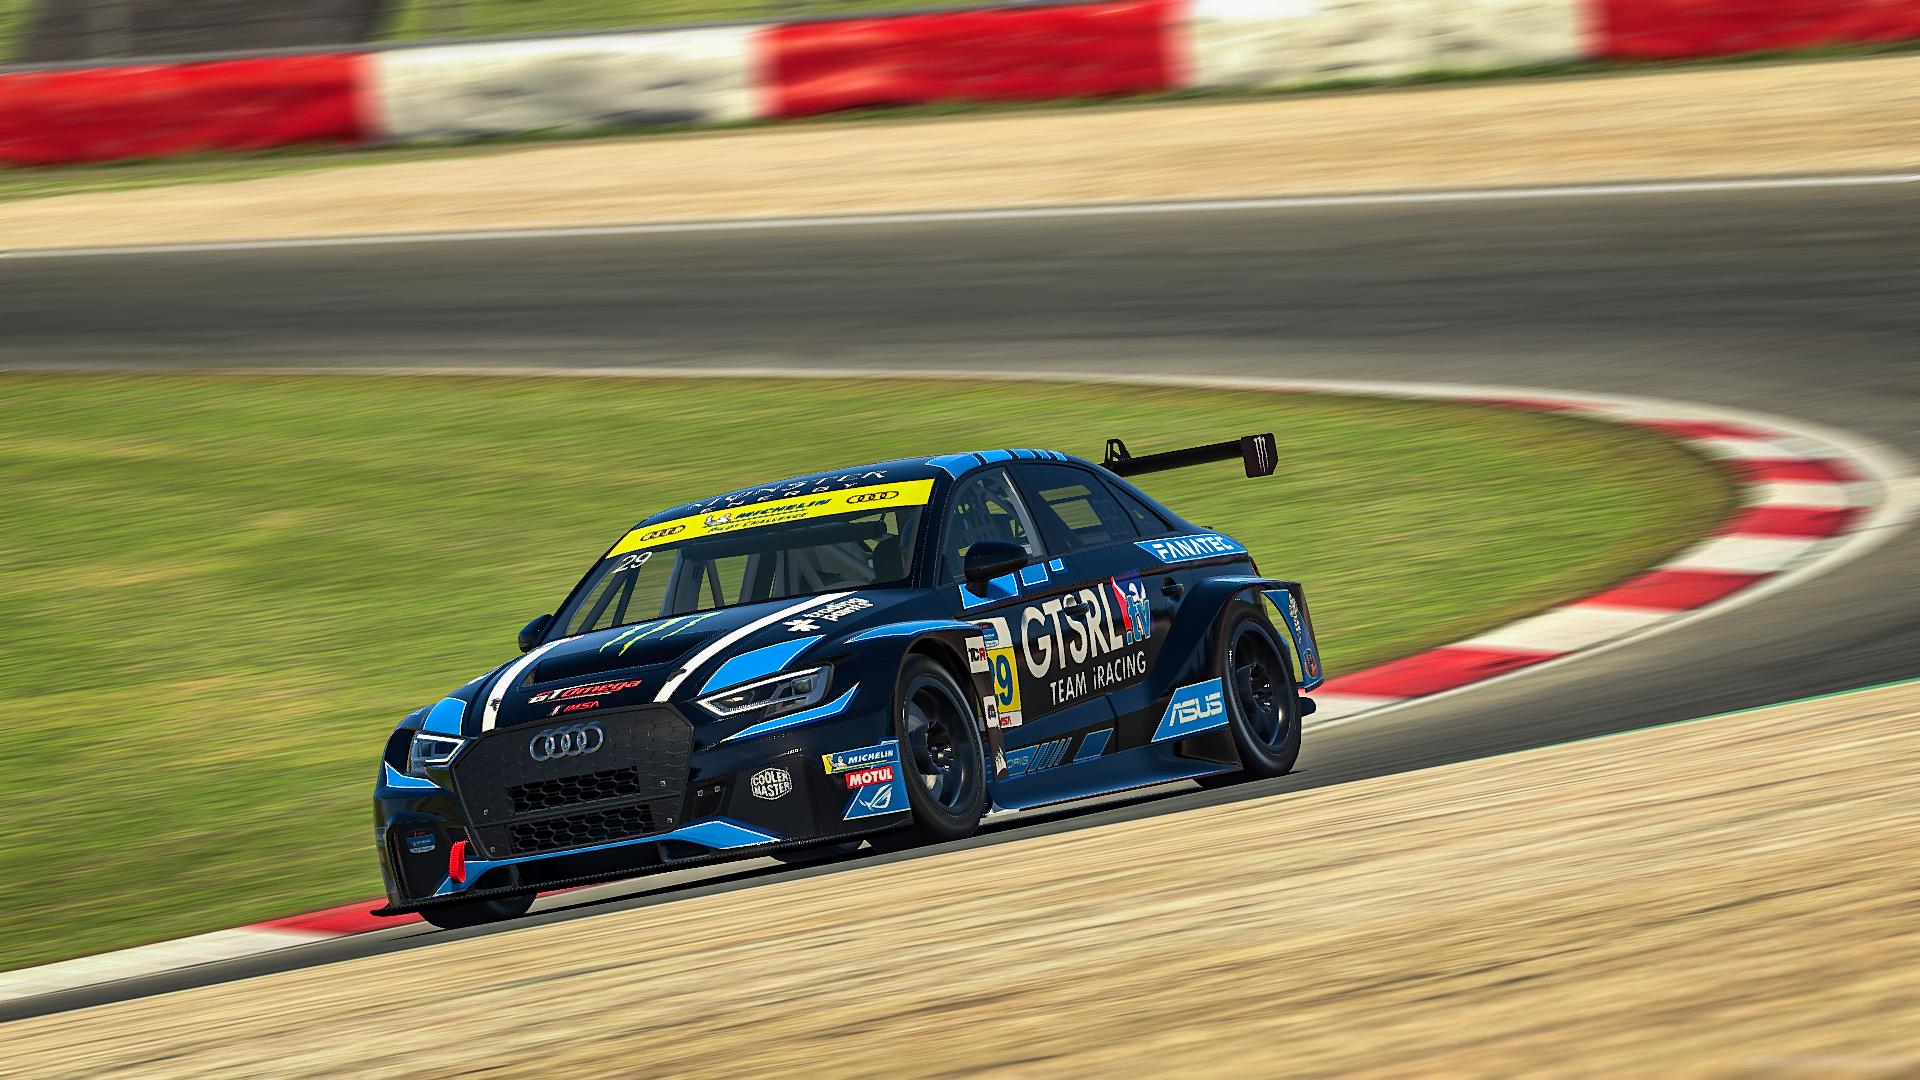 Preview of GTSRL Audi RS3 LMS by Vilda W.